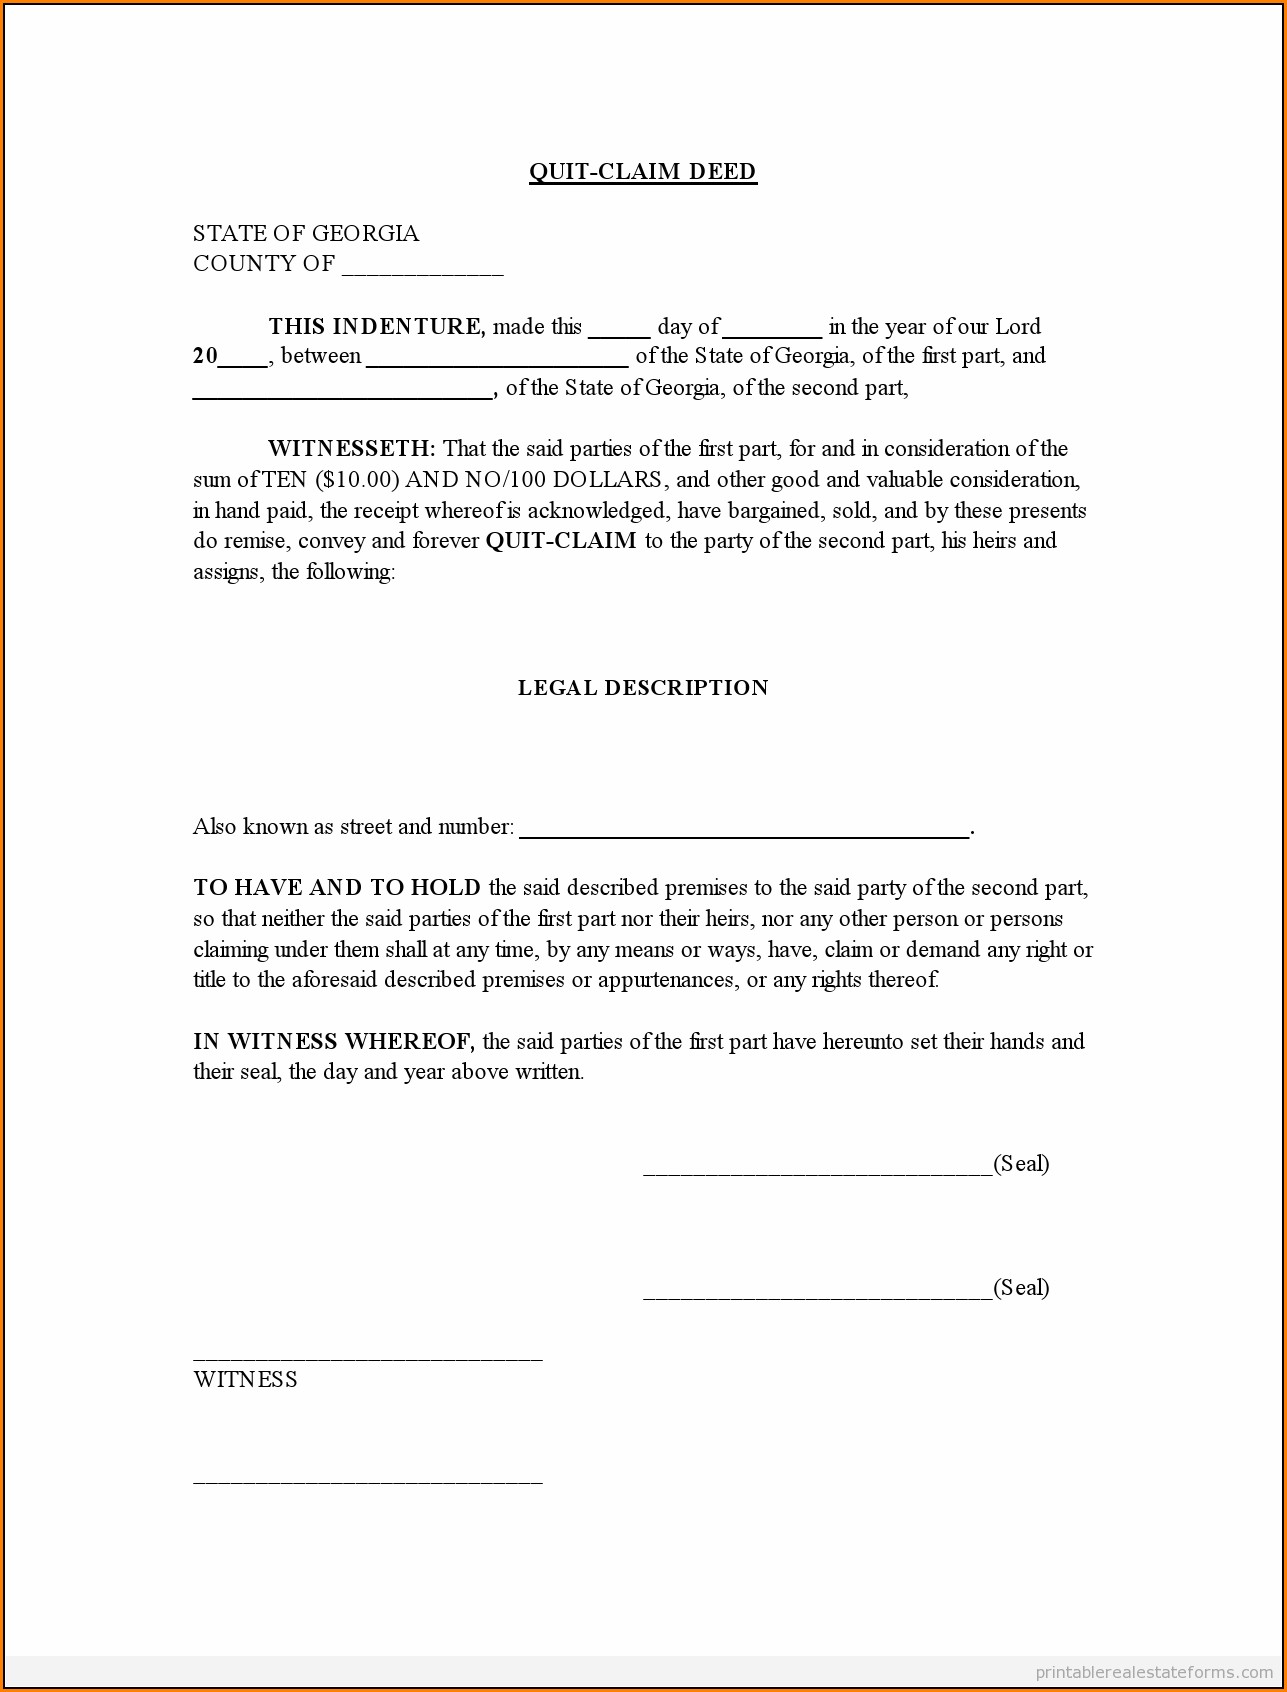 Free Blank Quit Claim Deed Form